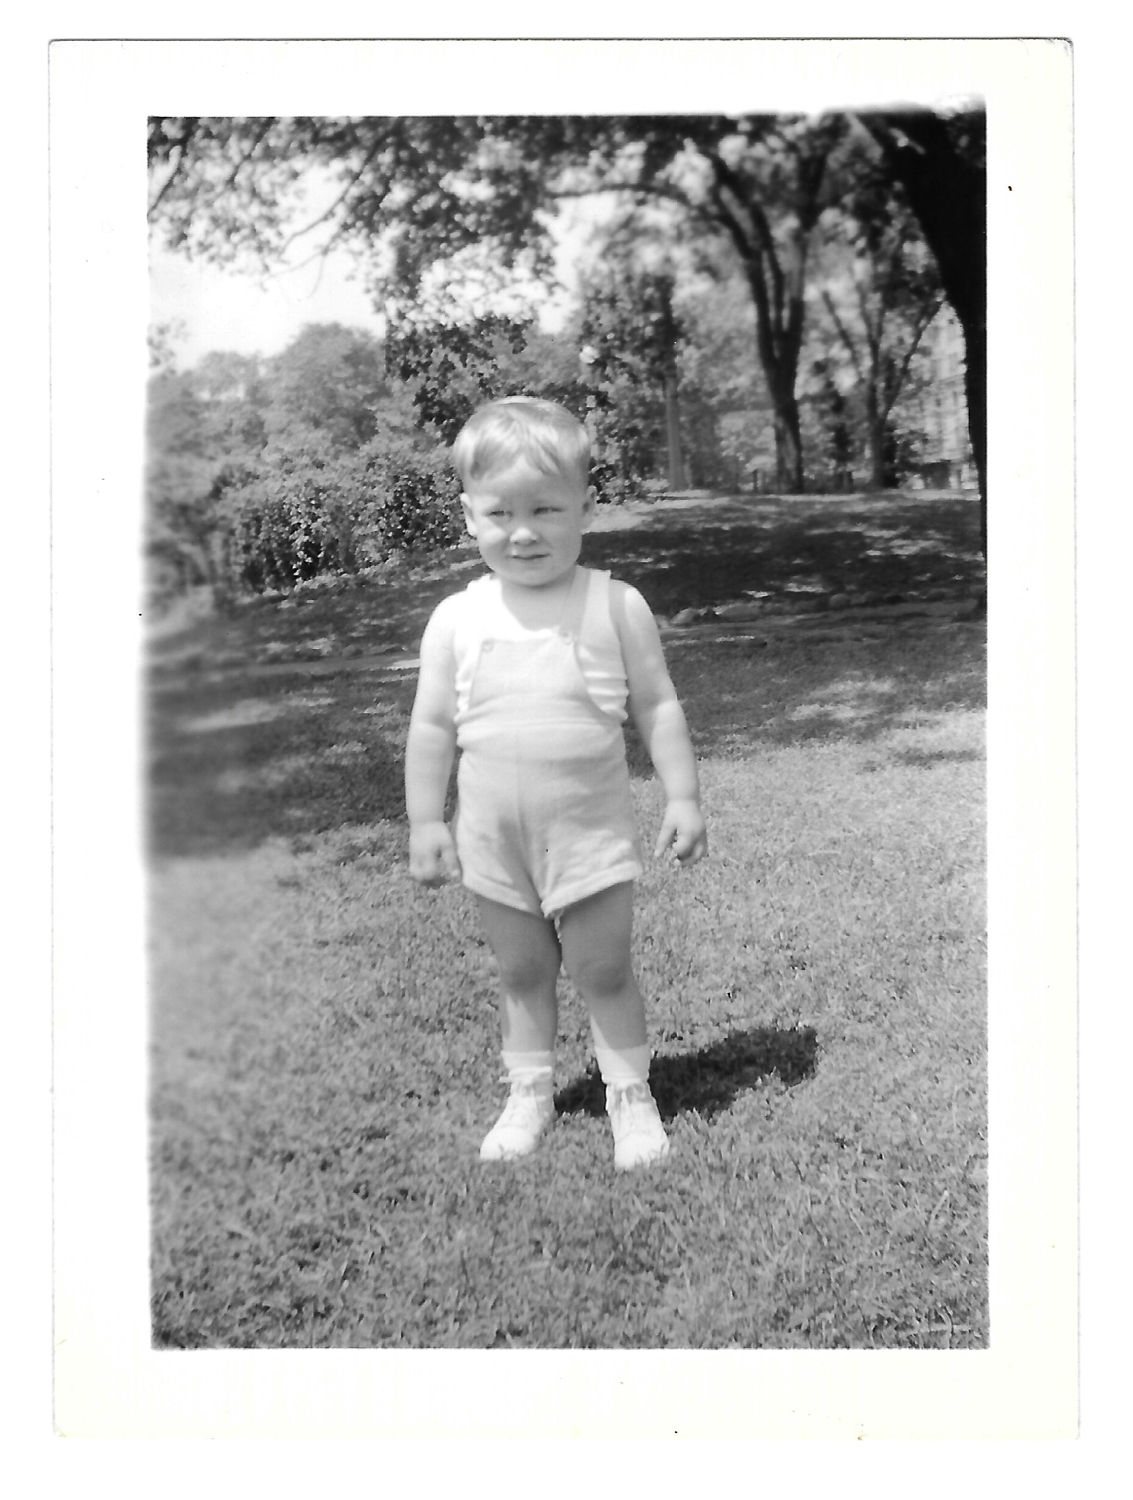 Herb Jr, two years old